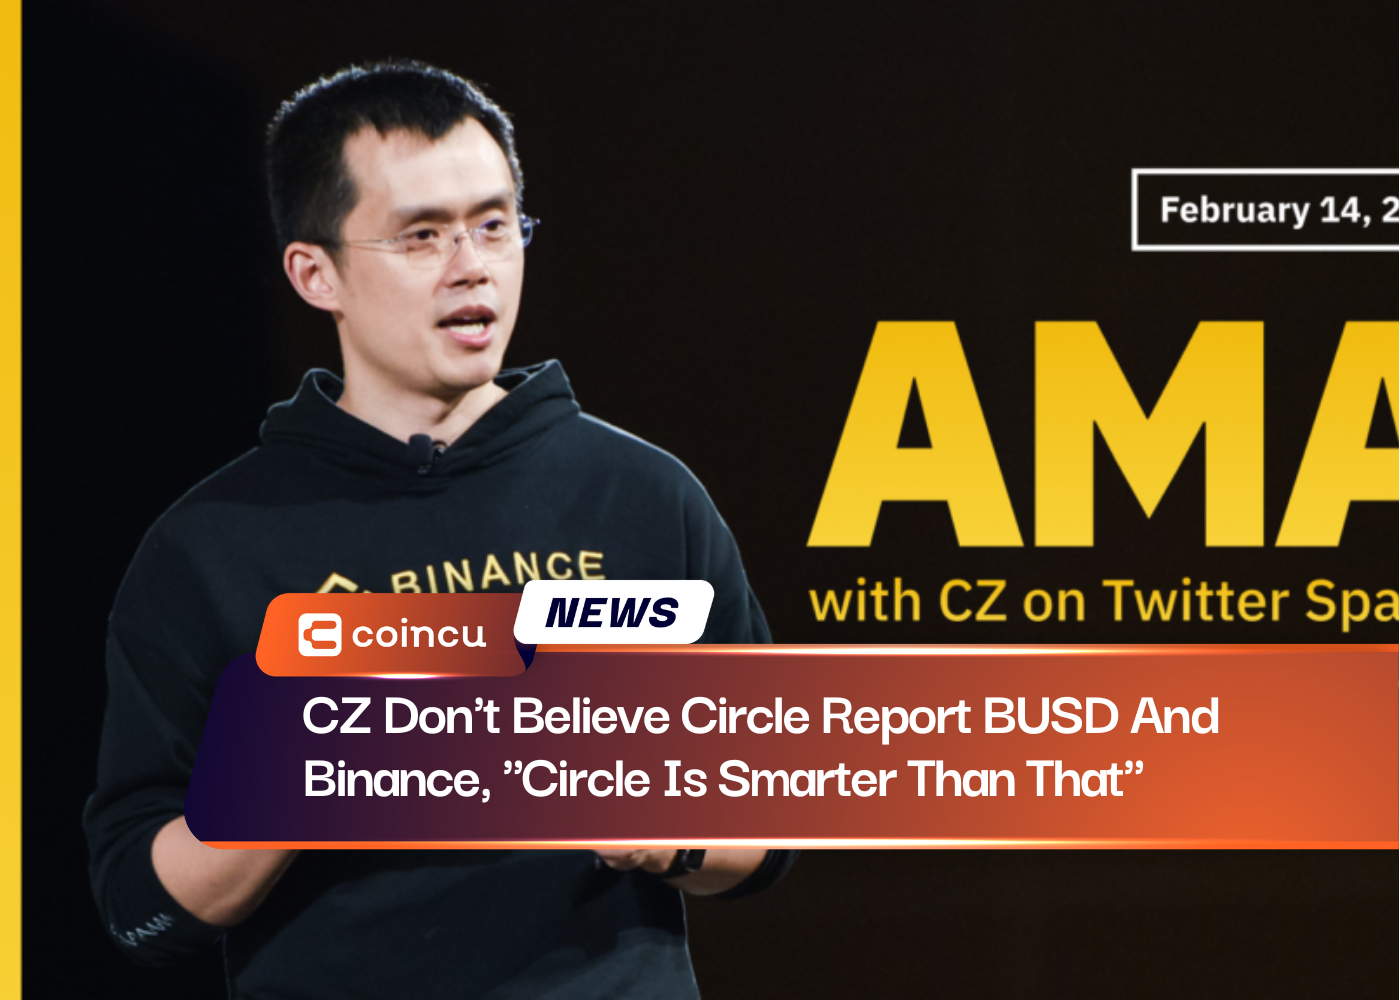 CZ Don't Believe Circle Report BUSD And Binance To Regulators, "Circle Is Smarter Than That"